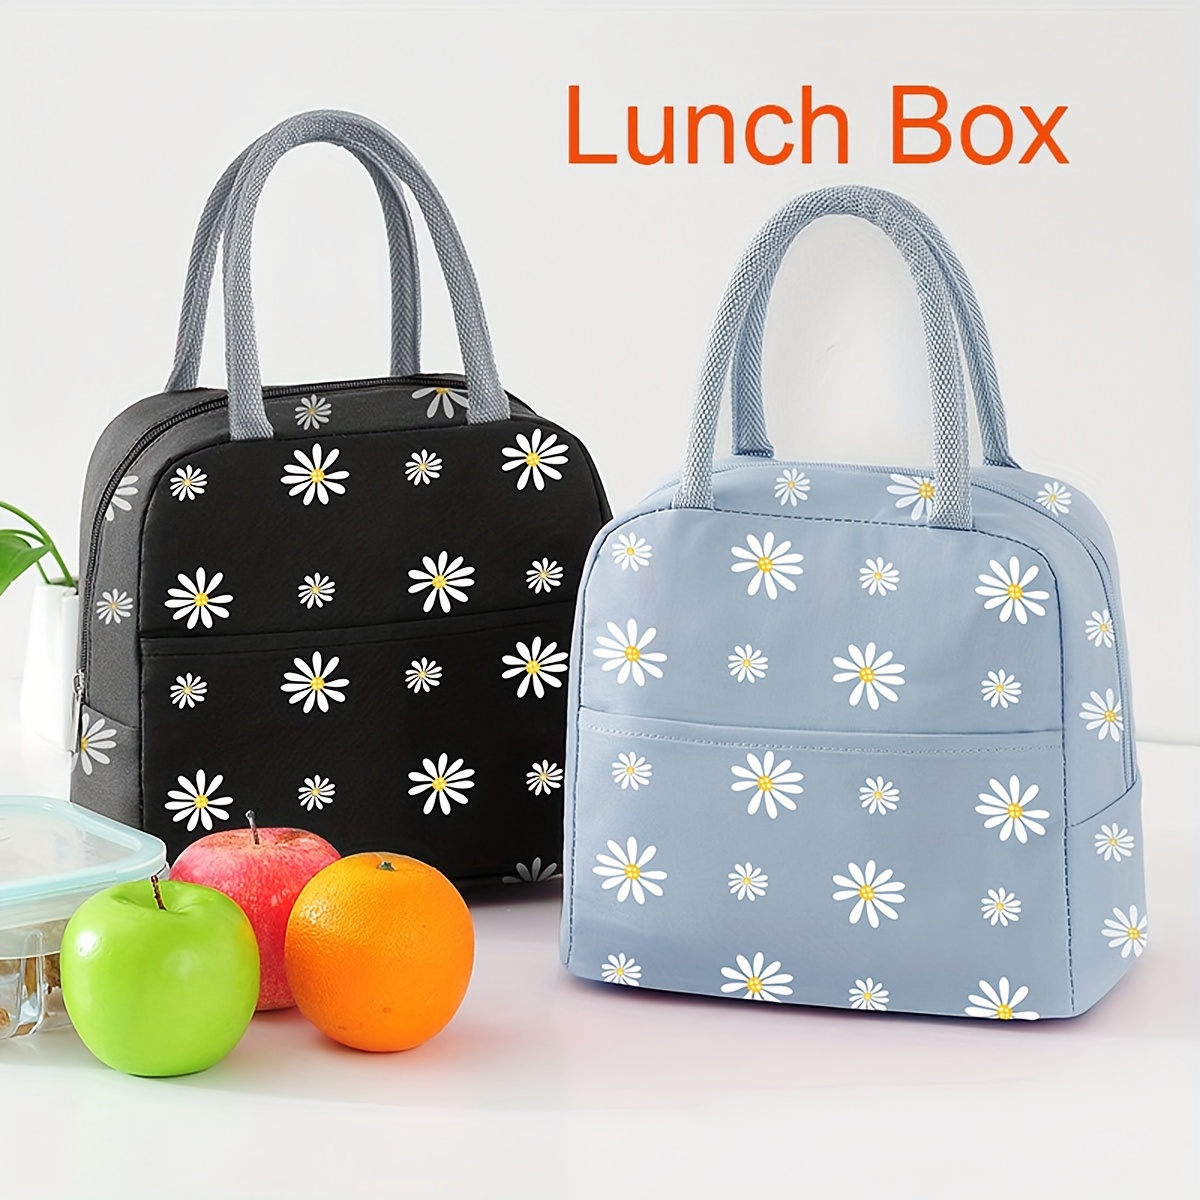 

Daisy-themed Insulated Lunch Bag - Waterproof, Large Capacity For School, Office, Camping & Picnics - Durable Polyester, Hand Washable